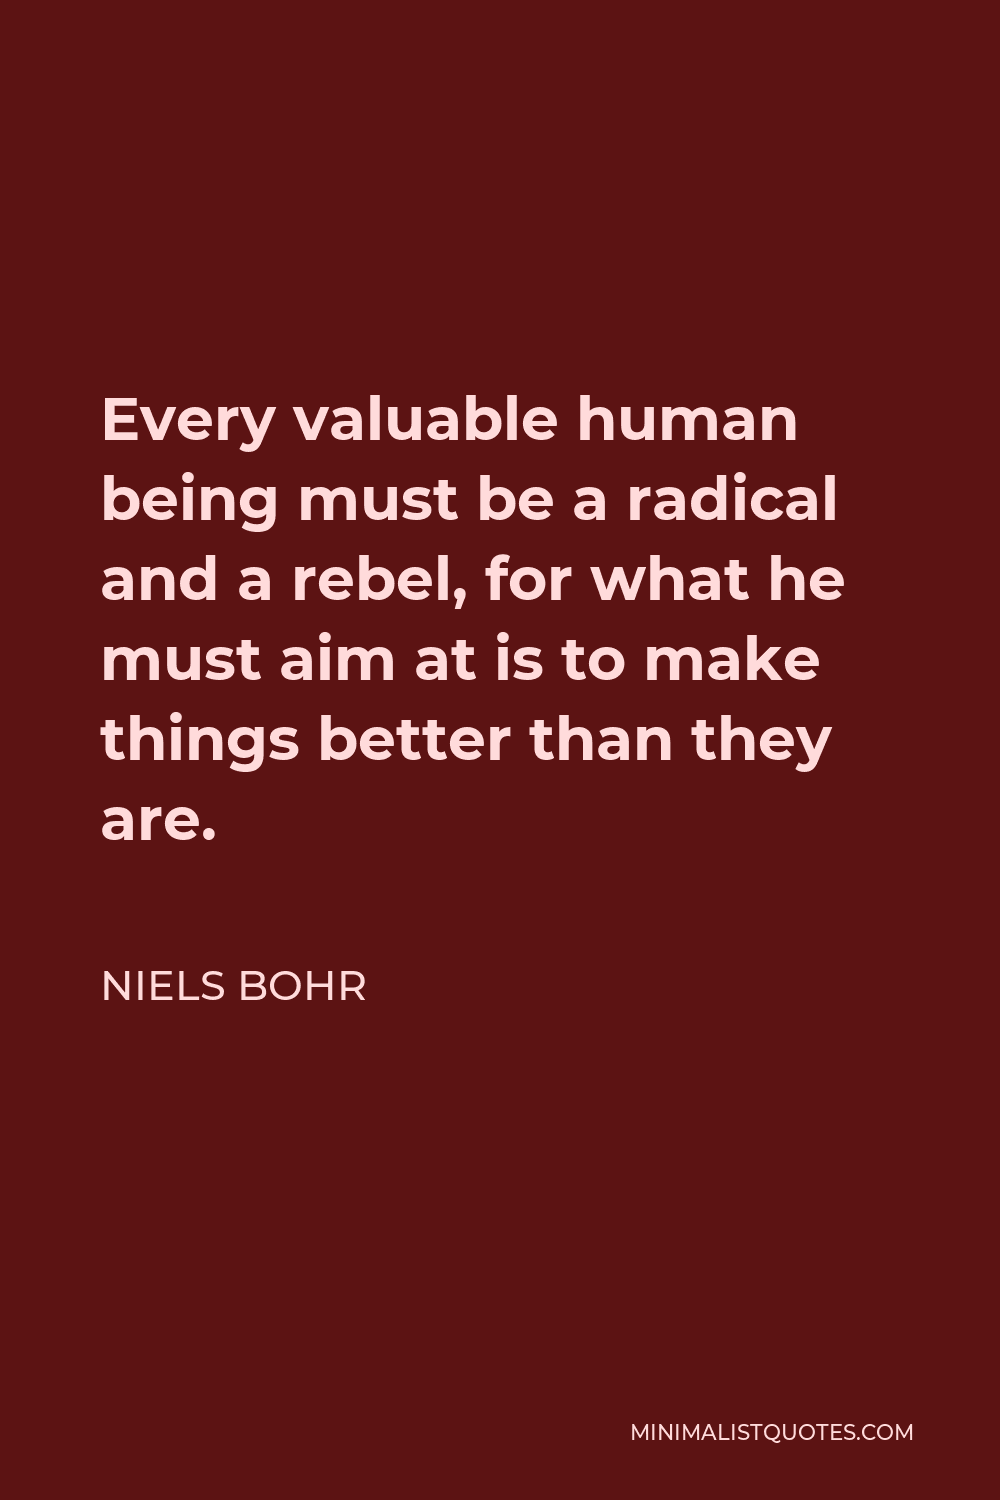 Niels Bohr Quote - Every valuable human being must be a radical and a rebel, for what he must aim at is to make things better than they are.